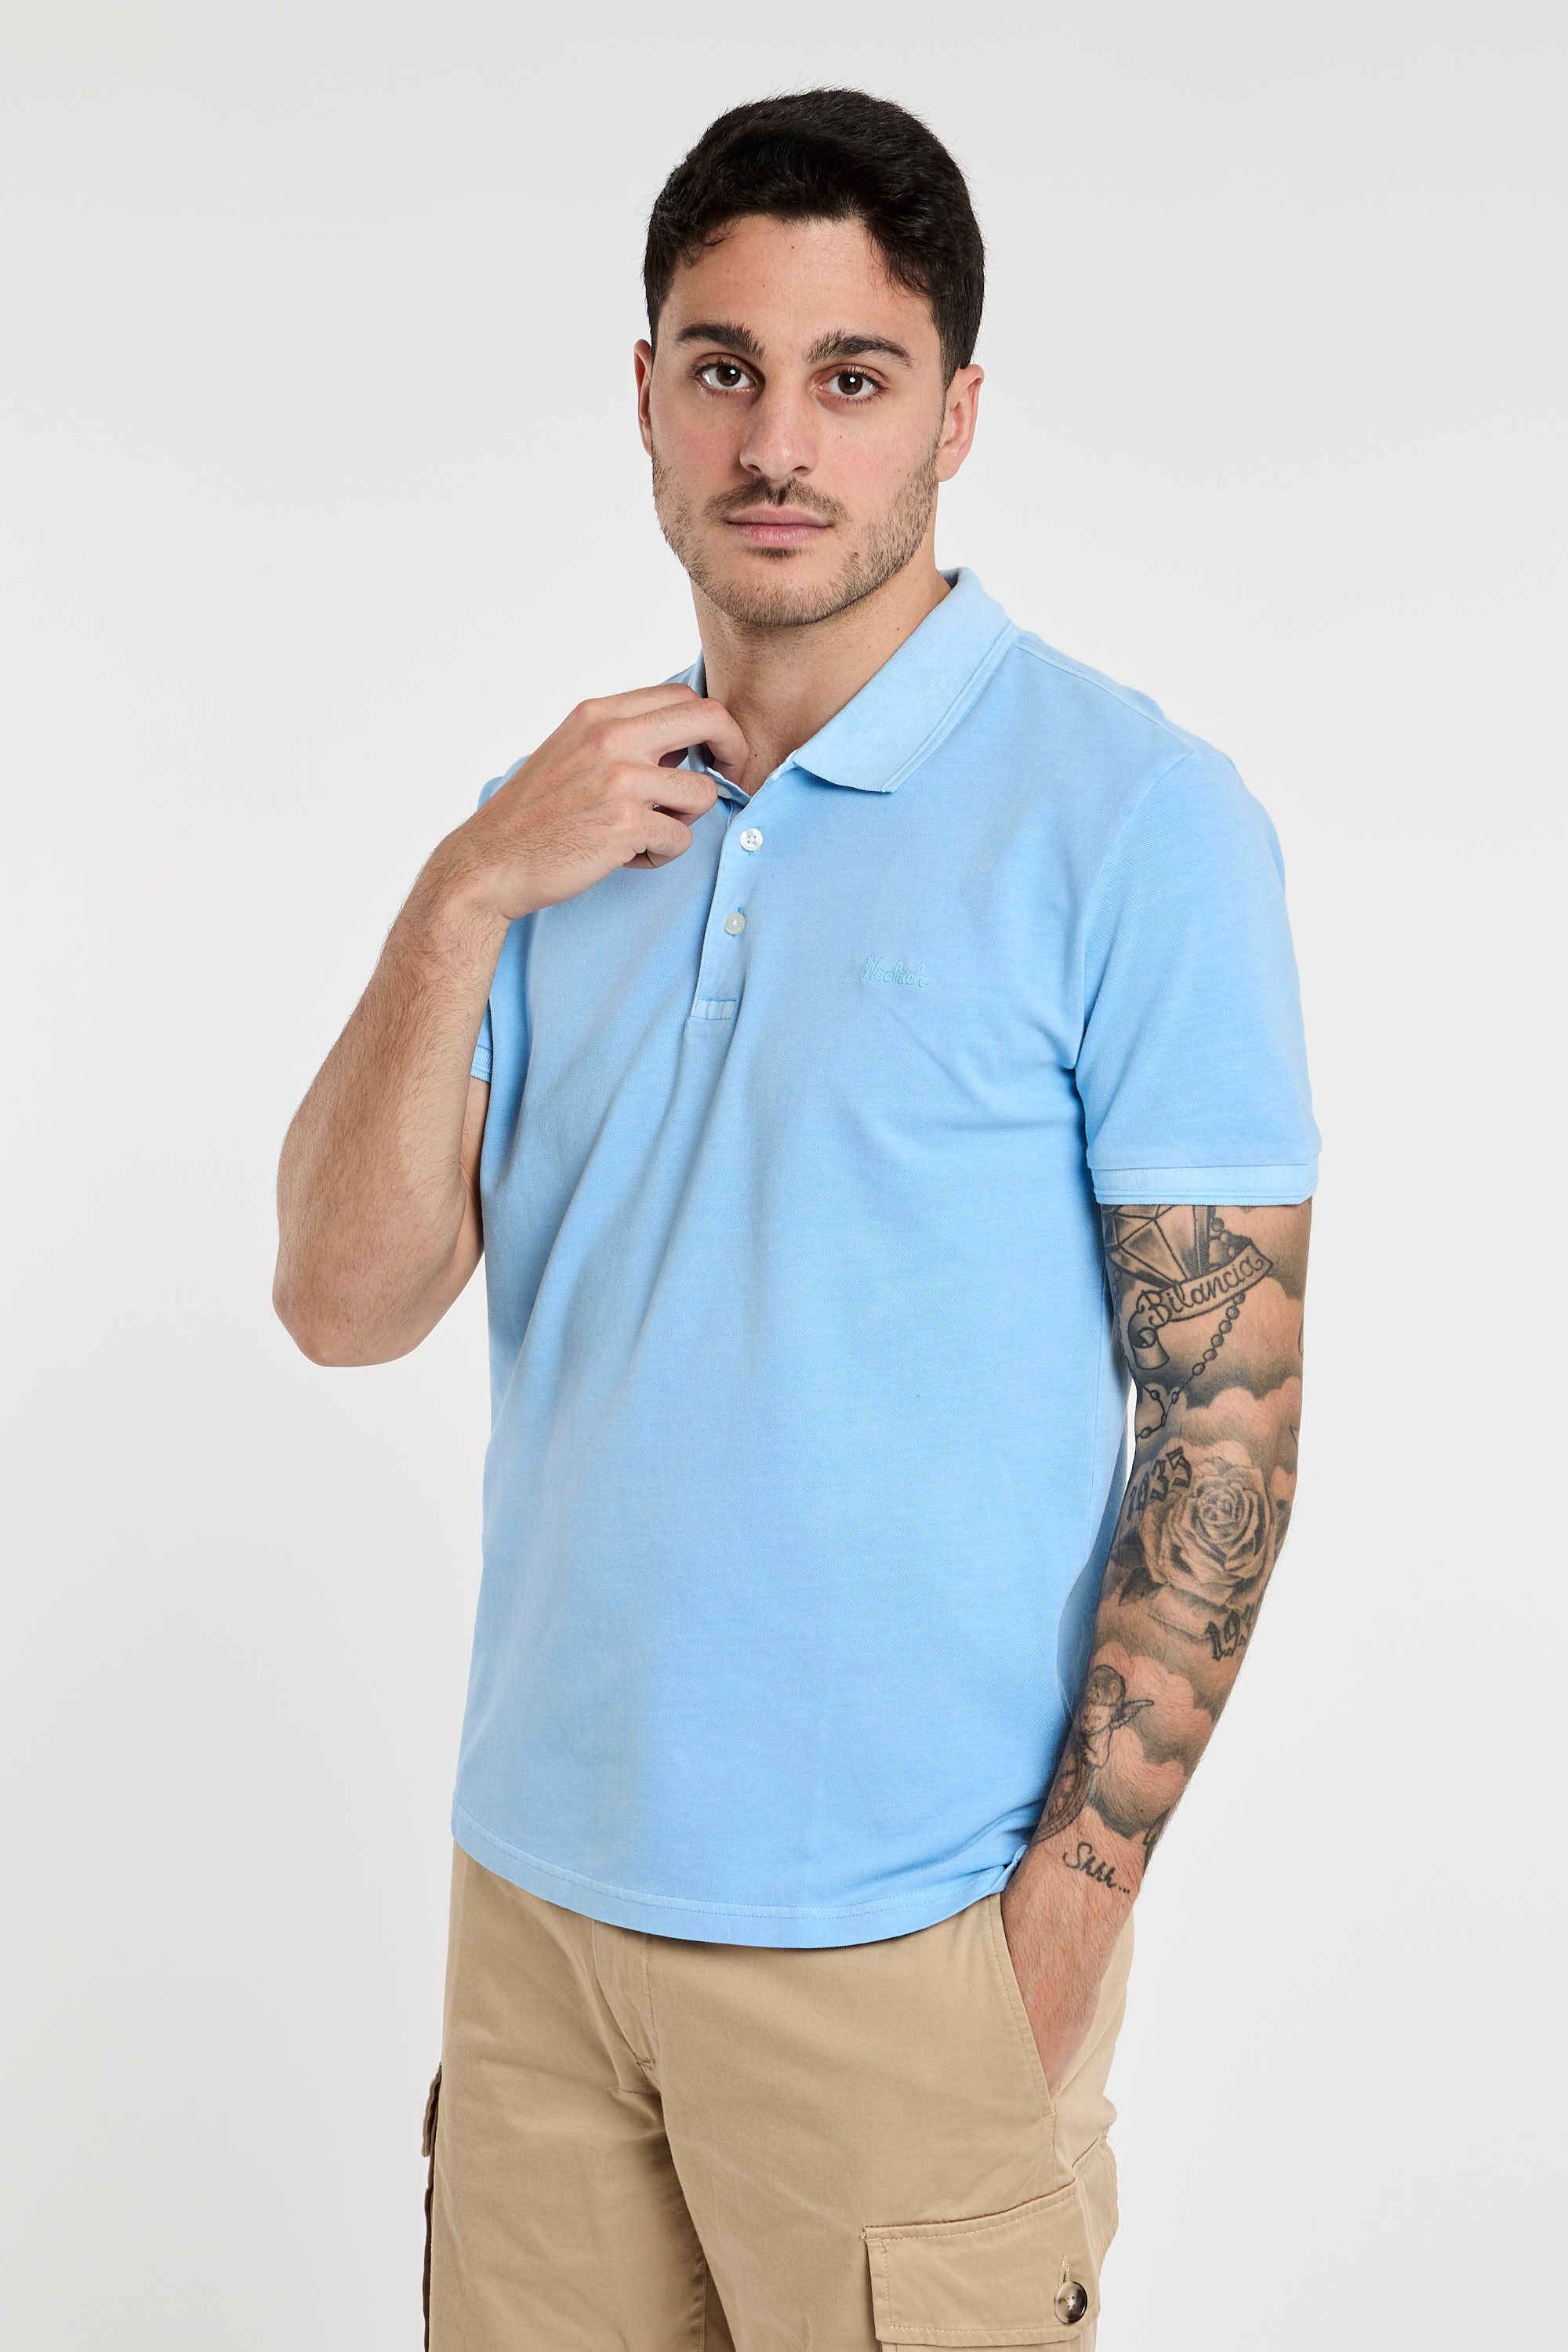 Woolrich Mackinack Piqué Stretch Cotton Polo in Light Blue-3